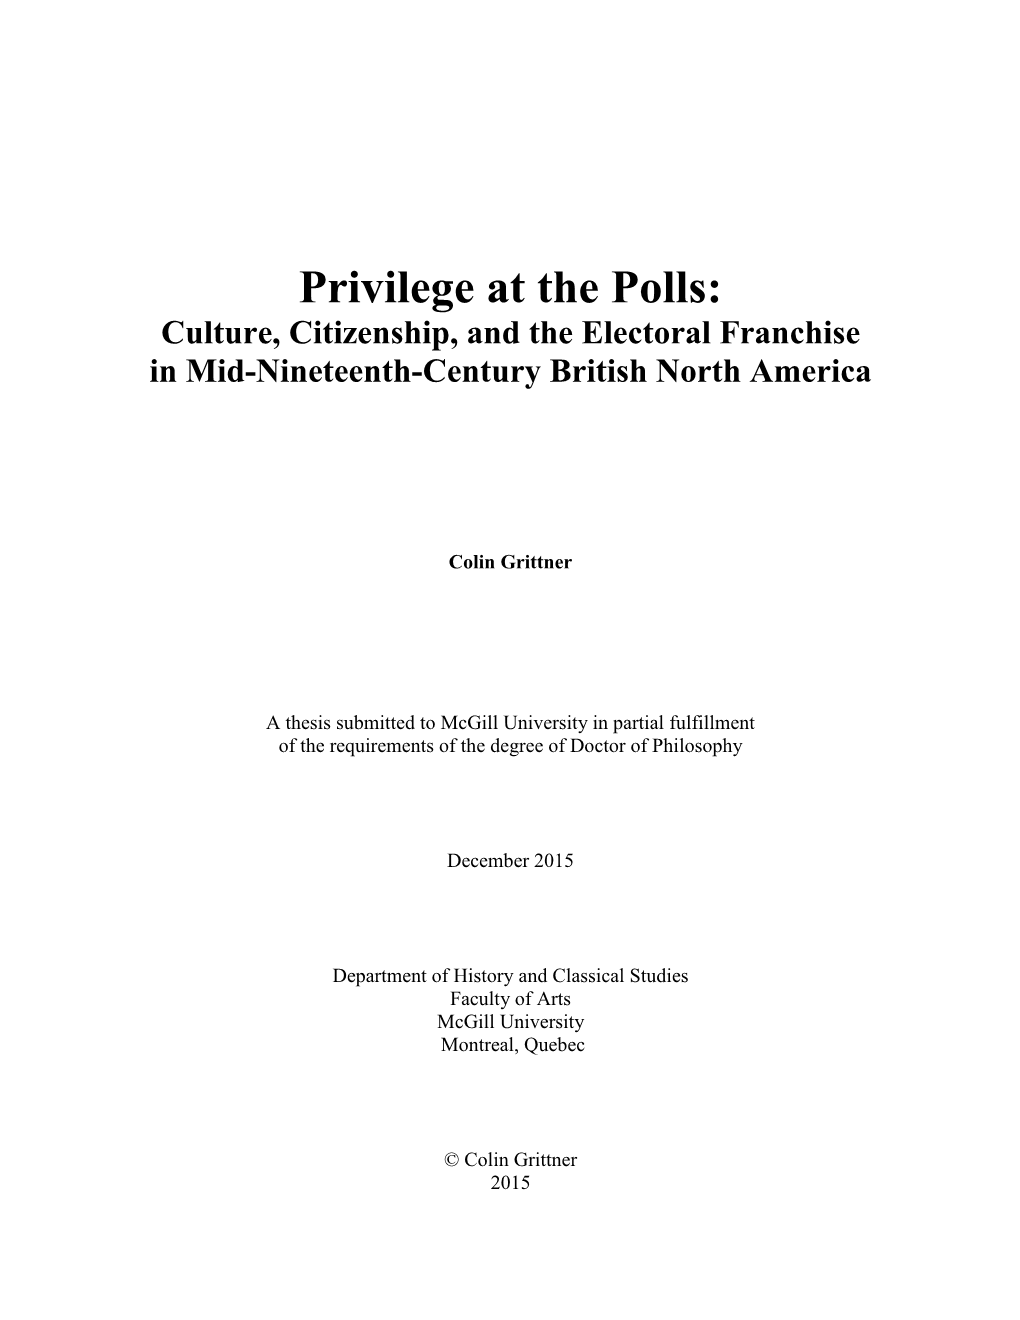 Privilege at the Polls: Culture, Citizenship, and the Electoral Franchise in Mid-Nineteenth-Century British North America